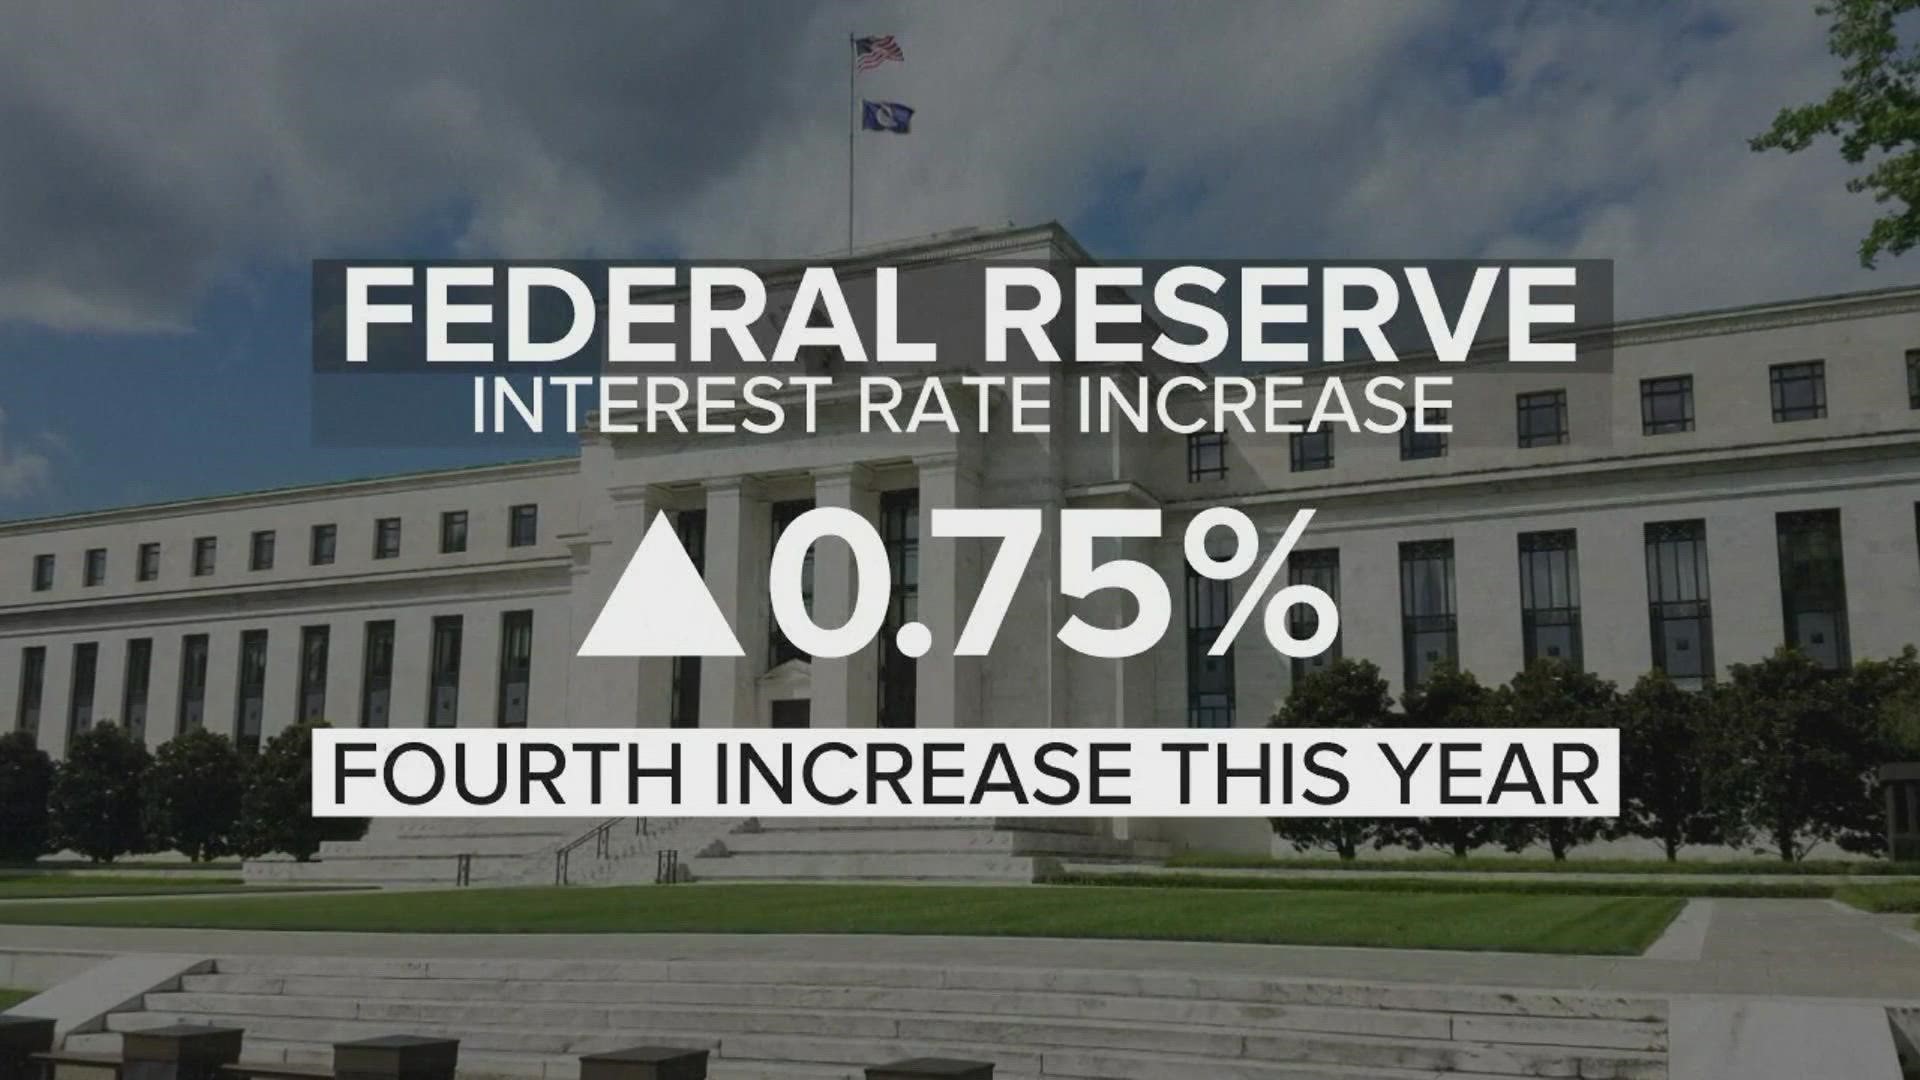 The Federal Reserve is raising interest rates again.